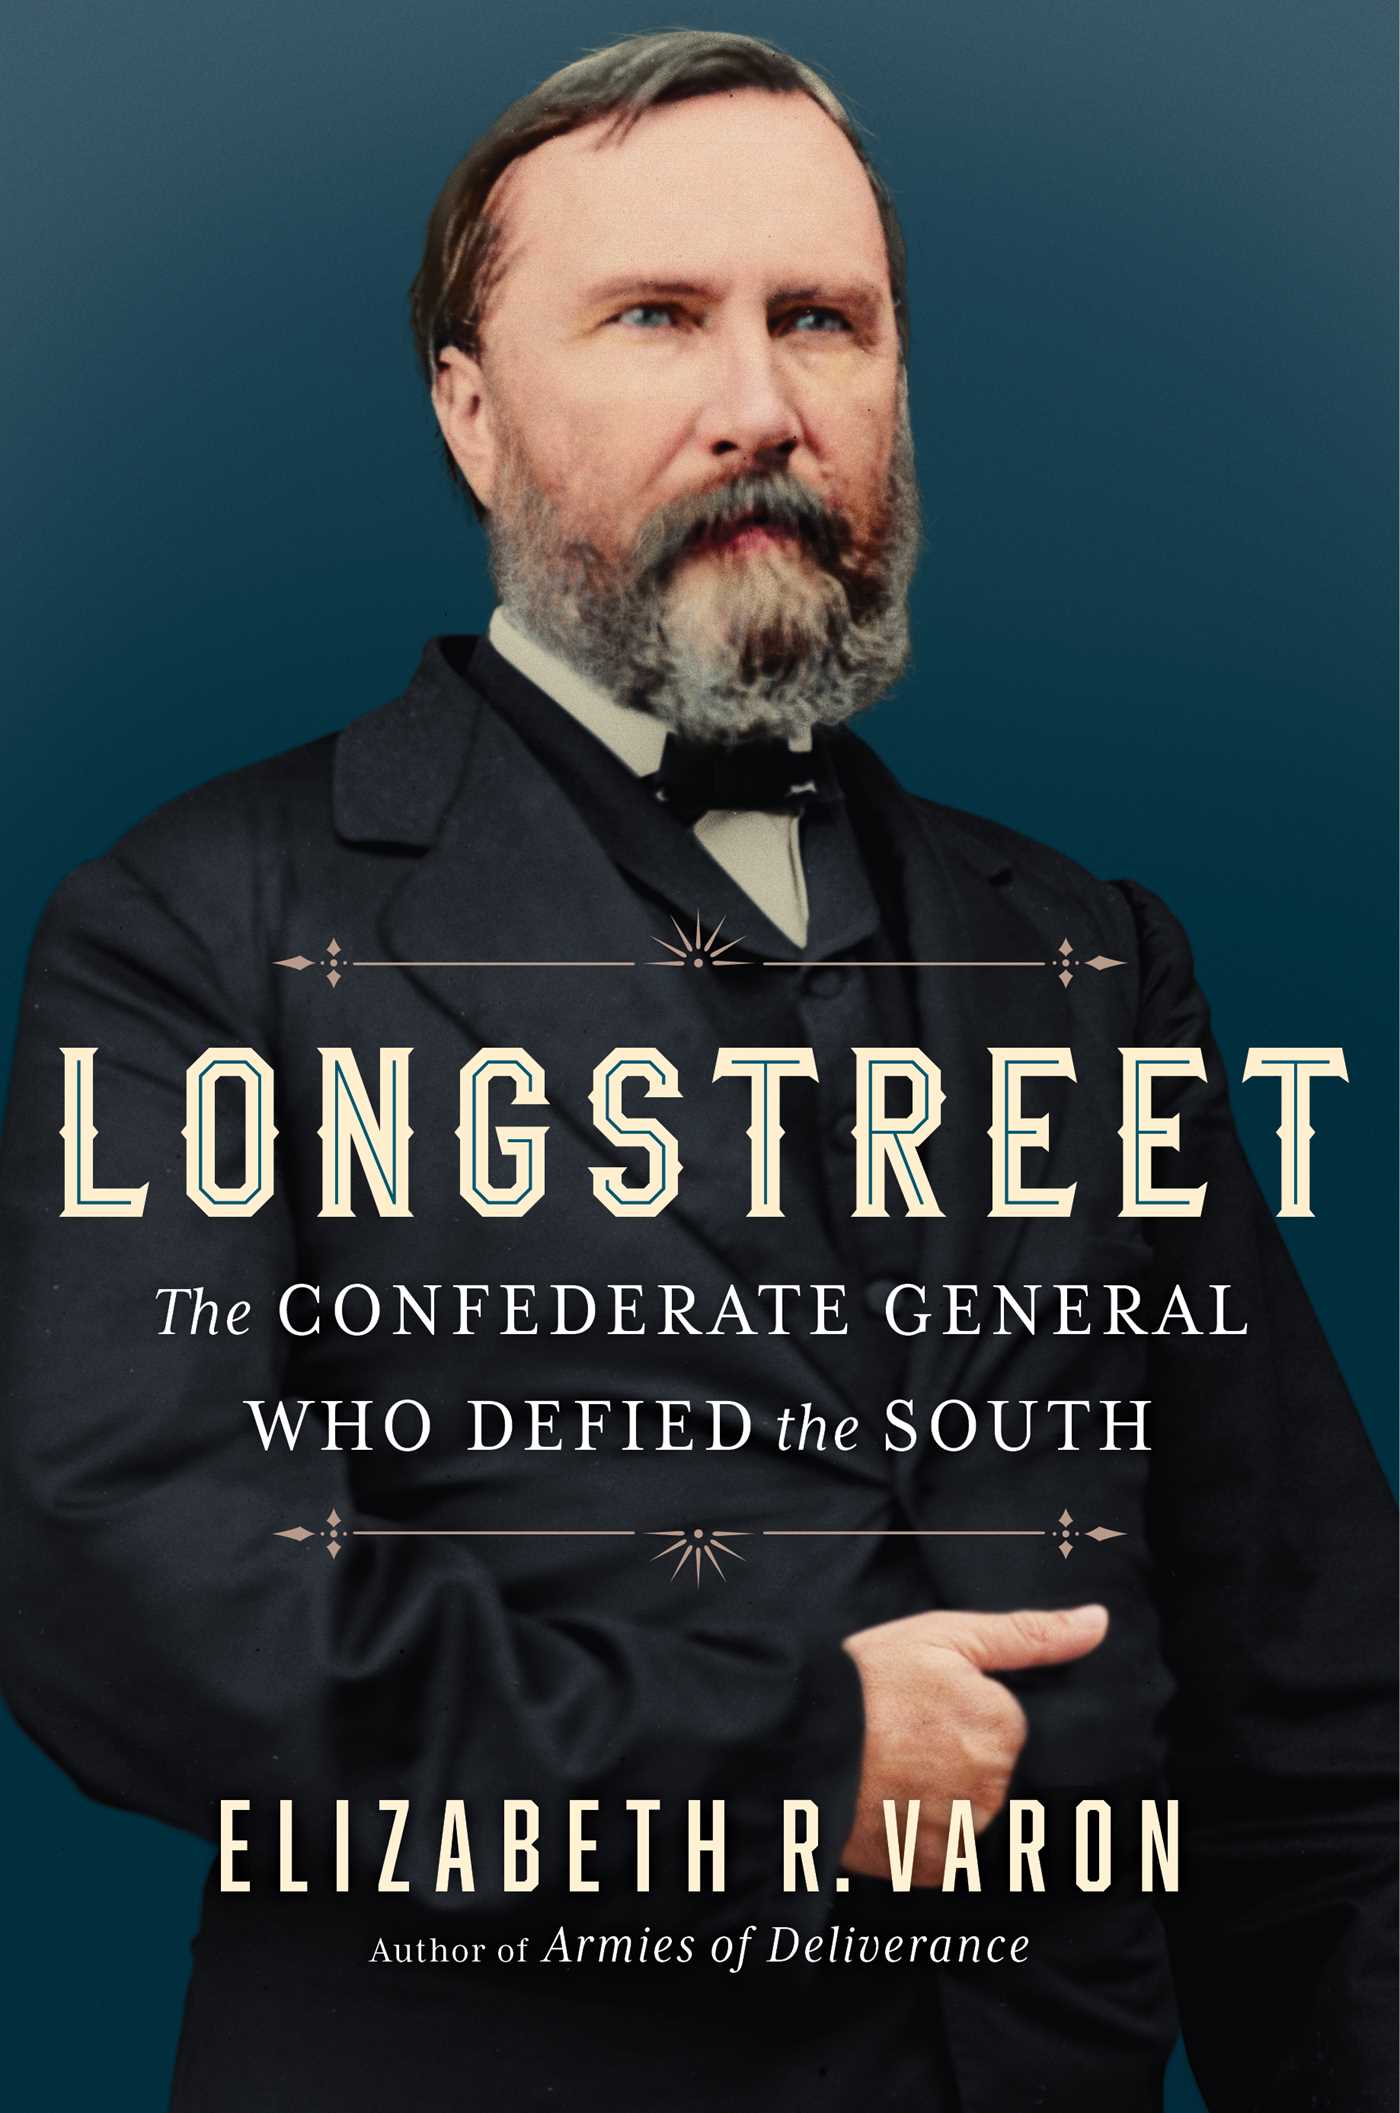 Cover of "Longstreet: The Confederate General Who Defied the South" by Elizabeth R. Varon features a husky man with a beard and slicked hair with a hand in his front pocket.